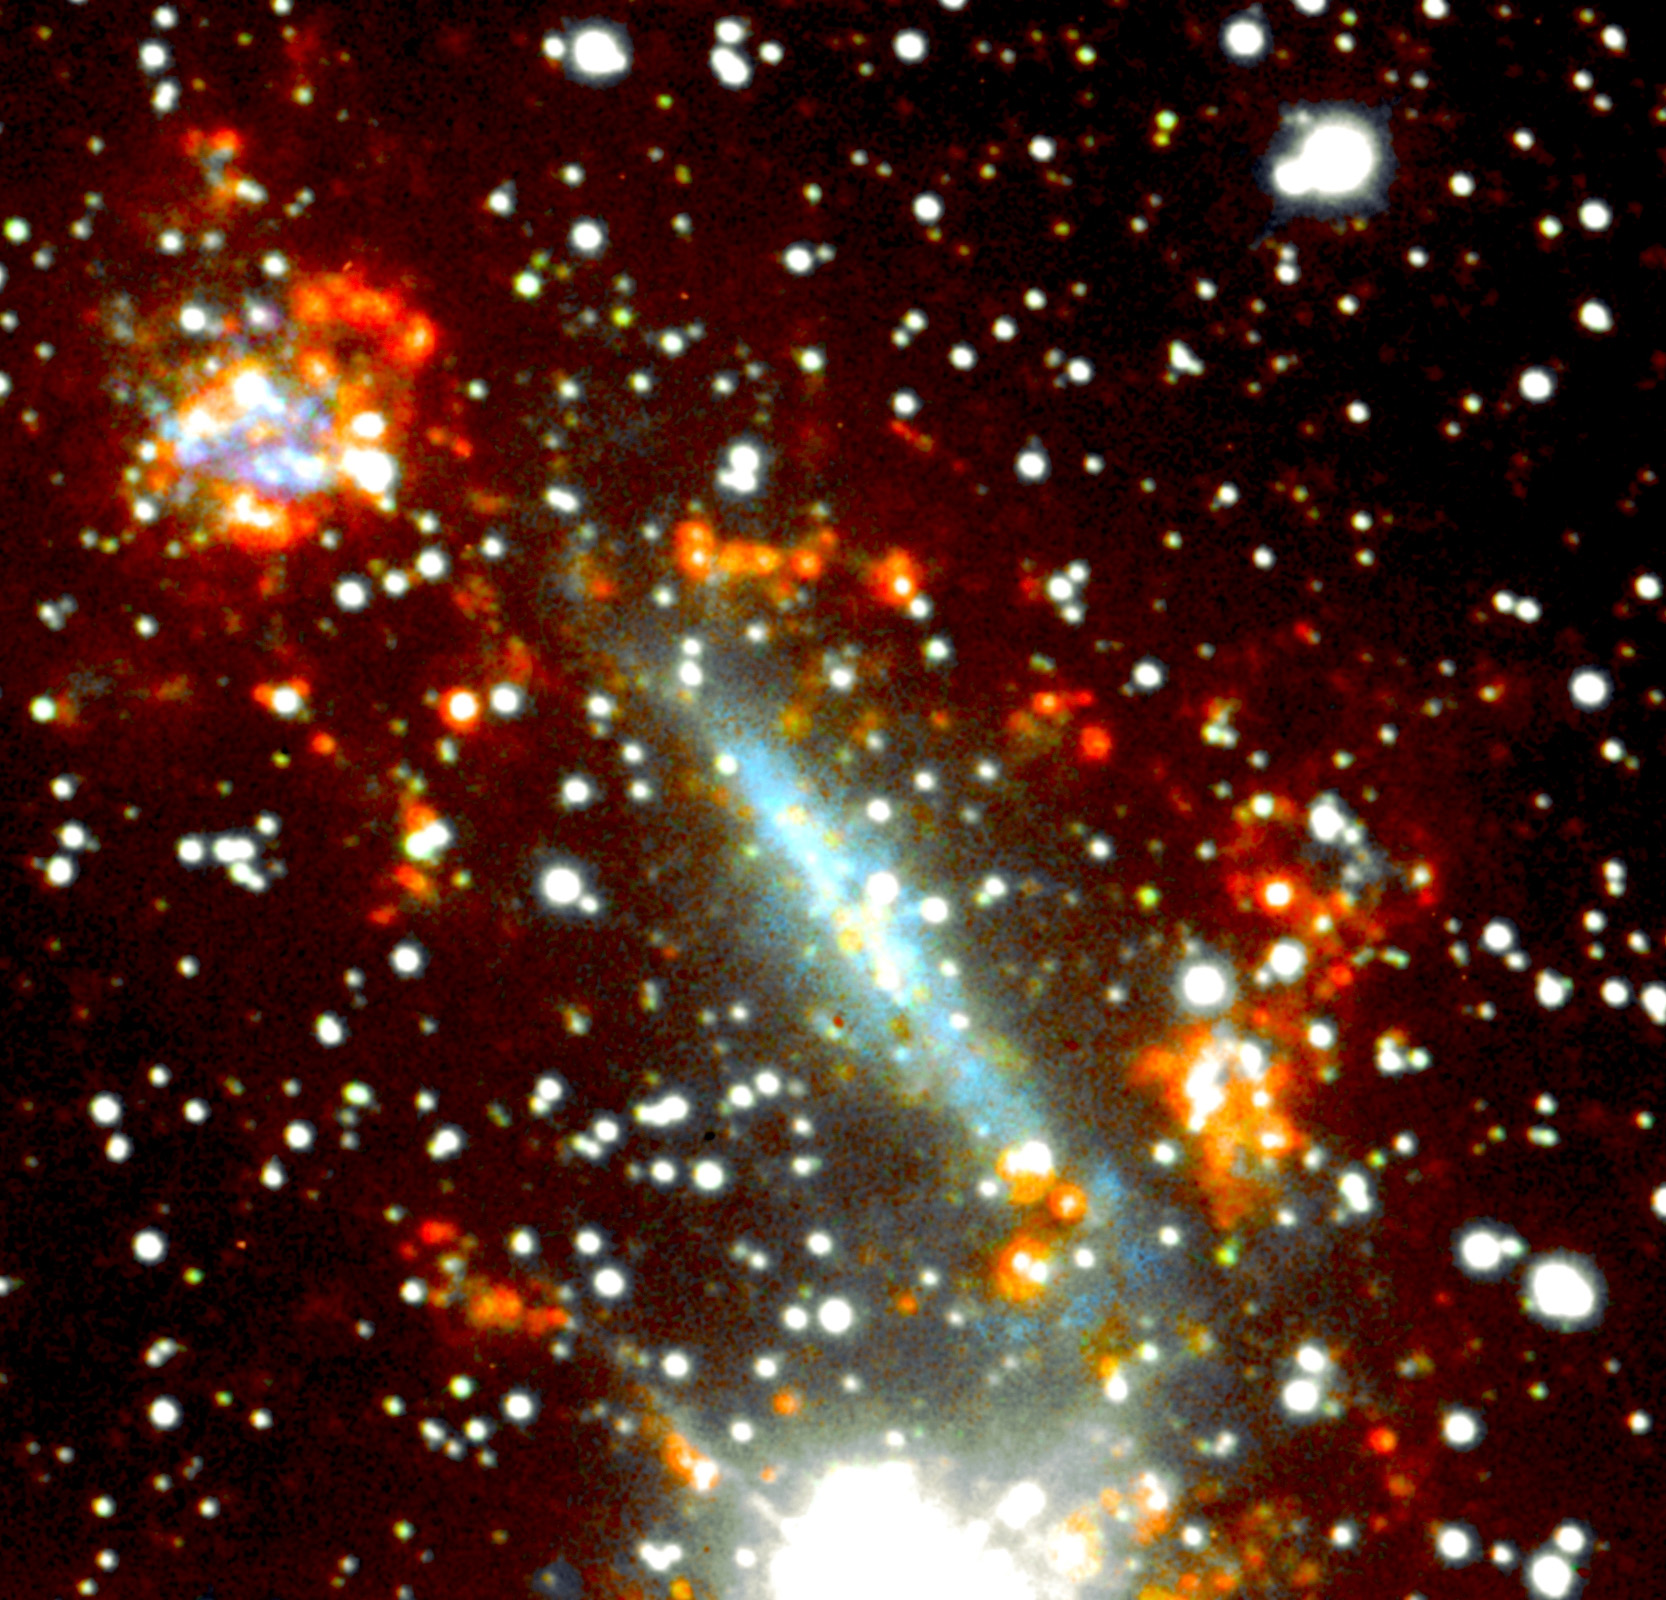 PHOTO: Researchers captured an image of a newly-discovered collisional ring galaxy called "Kathryn's Wheel" using the CTIO telescope in Chile.